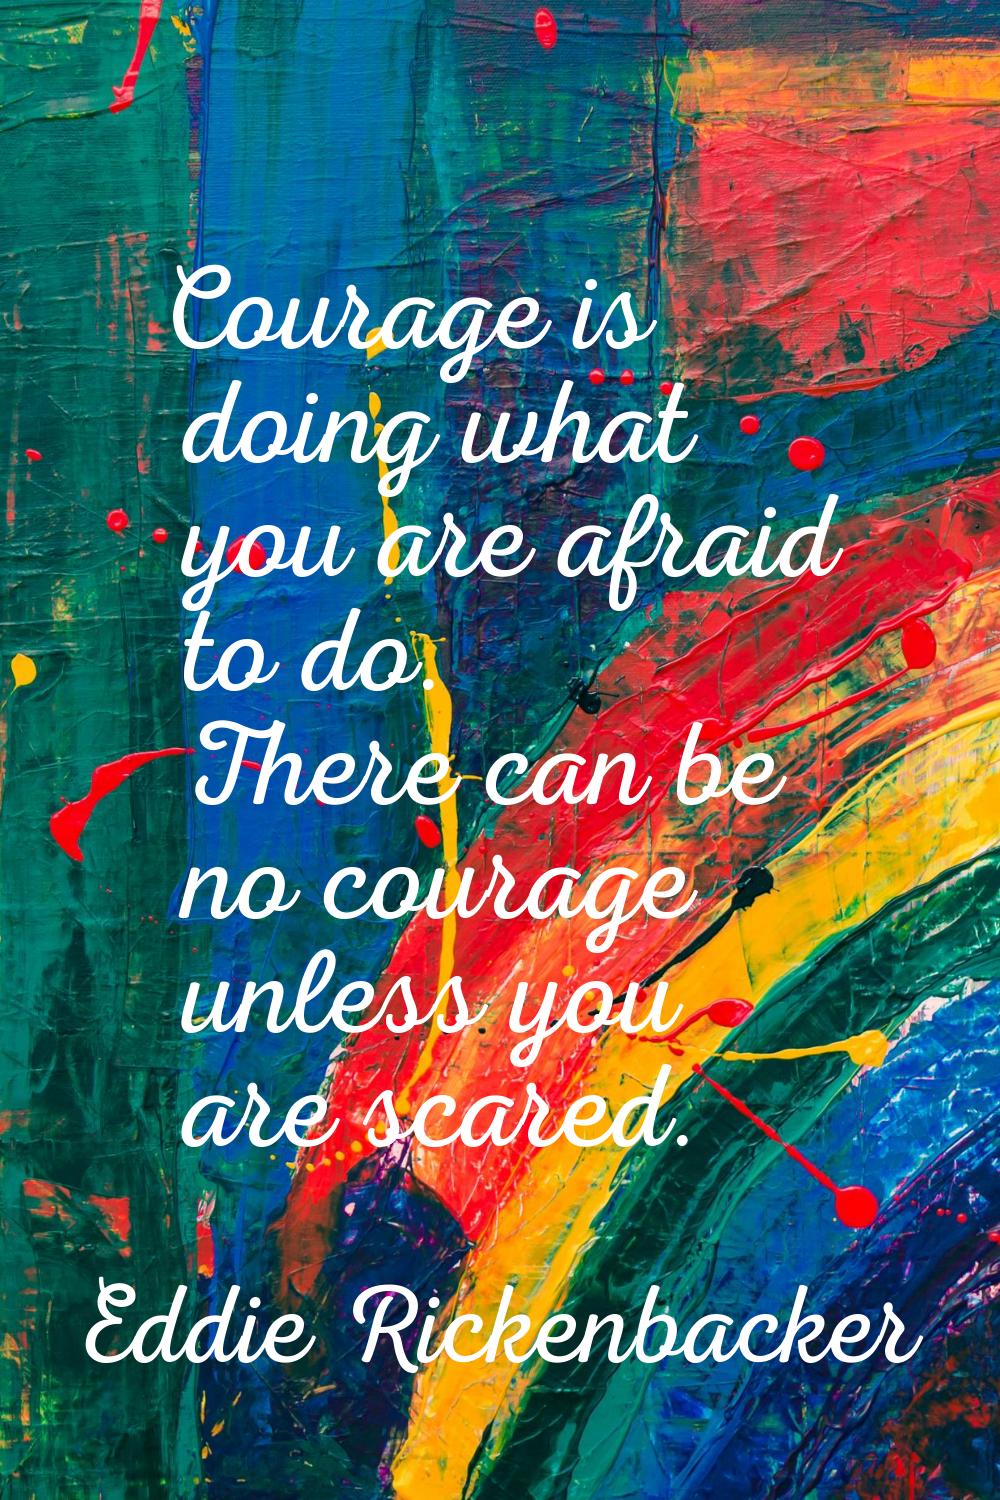 Courage is doing what you are afraid to do. There can be no courage unless you are scared.